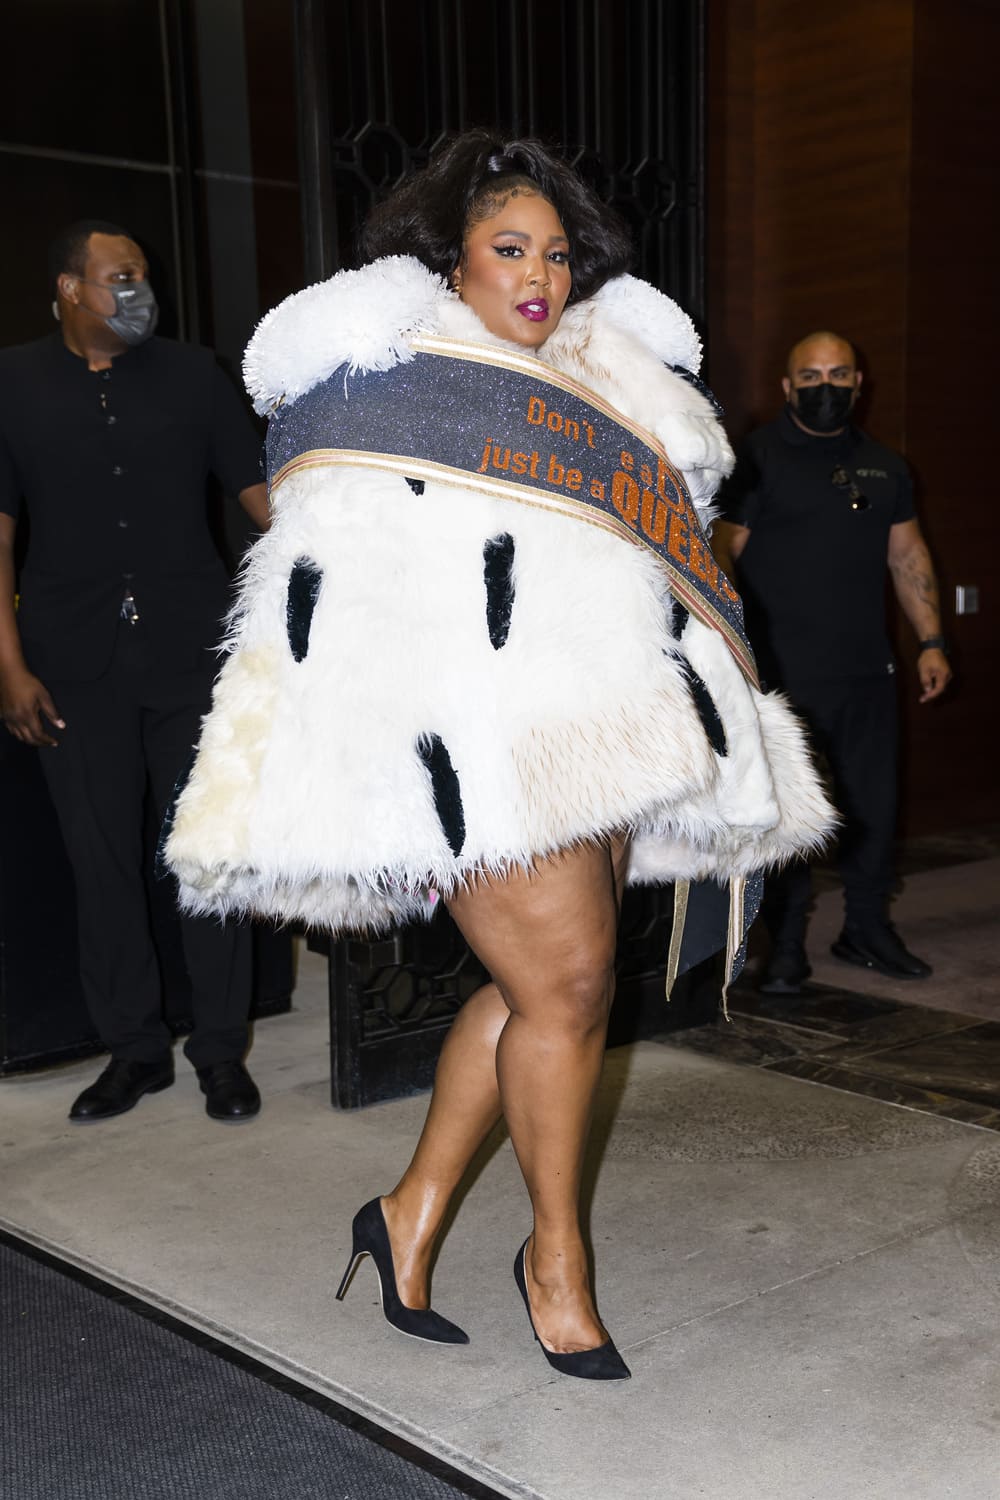 Lizzo wearing faux-ermine dress with ‘Don’t Be a Drag Just Be a Queen’ sash by Viktor&Rolf, New York City, 2021. Ph. ©Gotham, GC Images, Getty Images